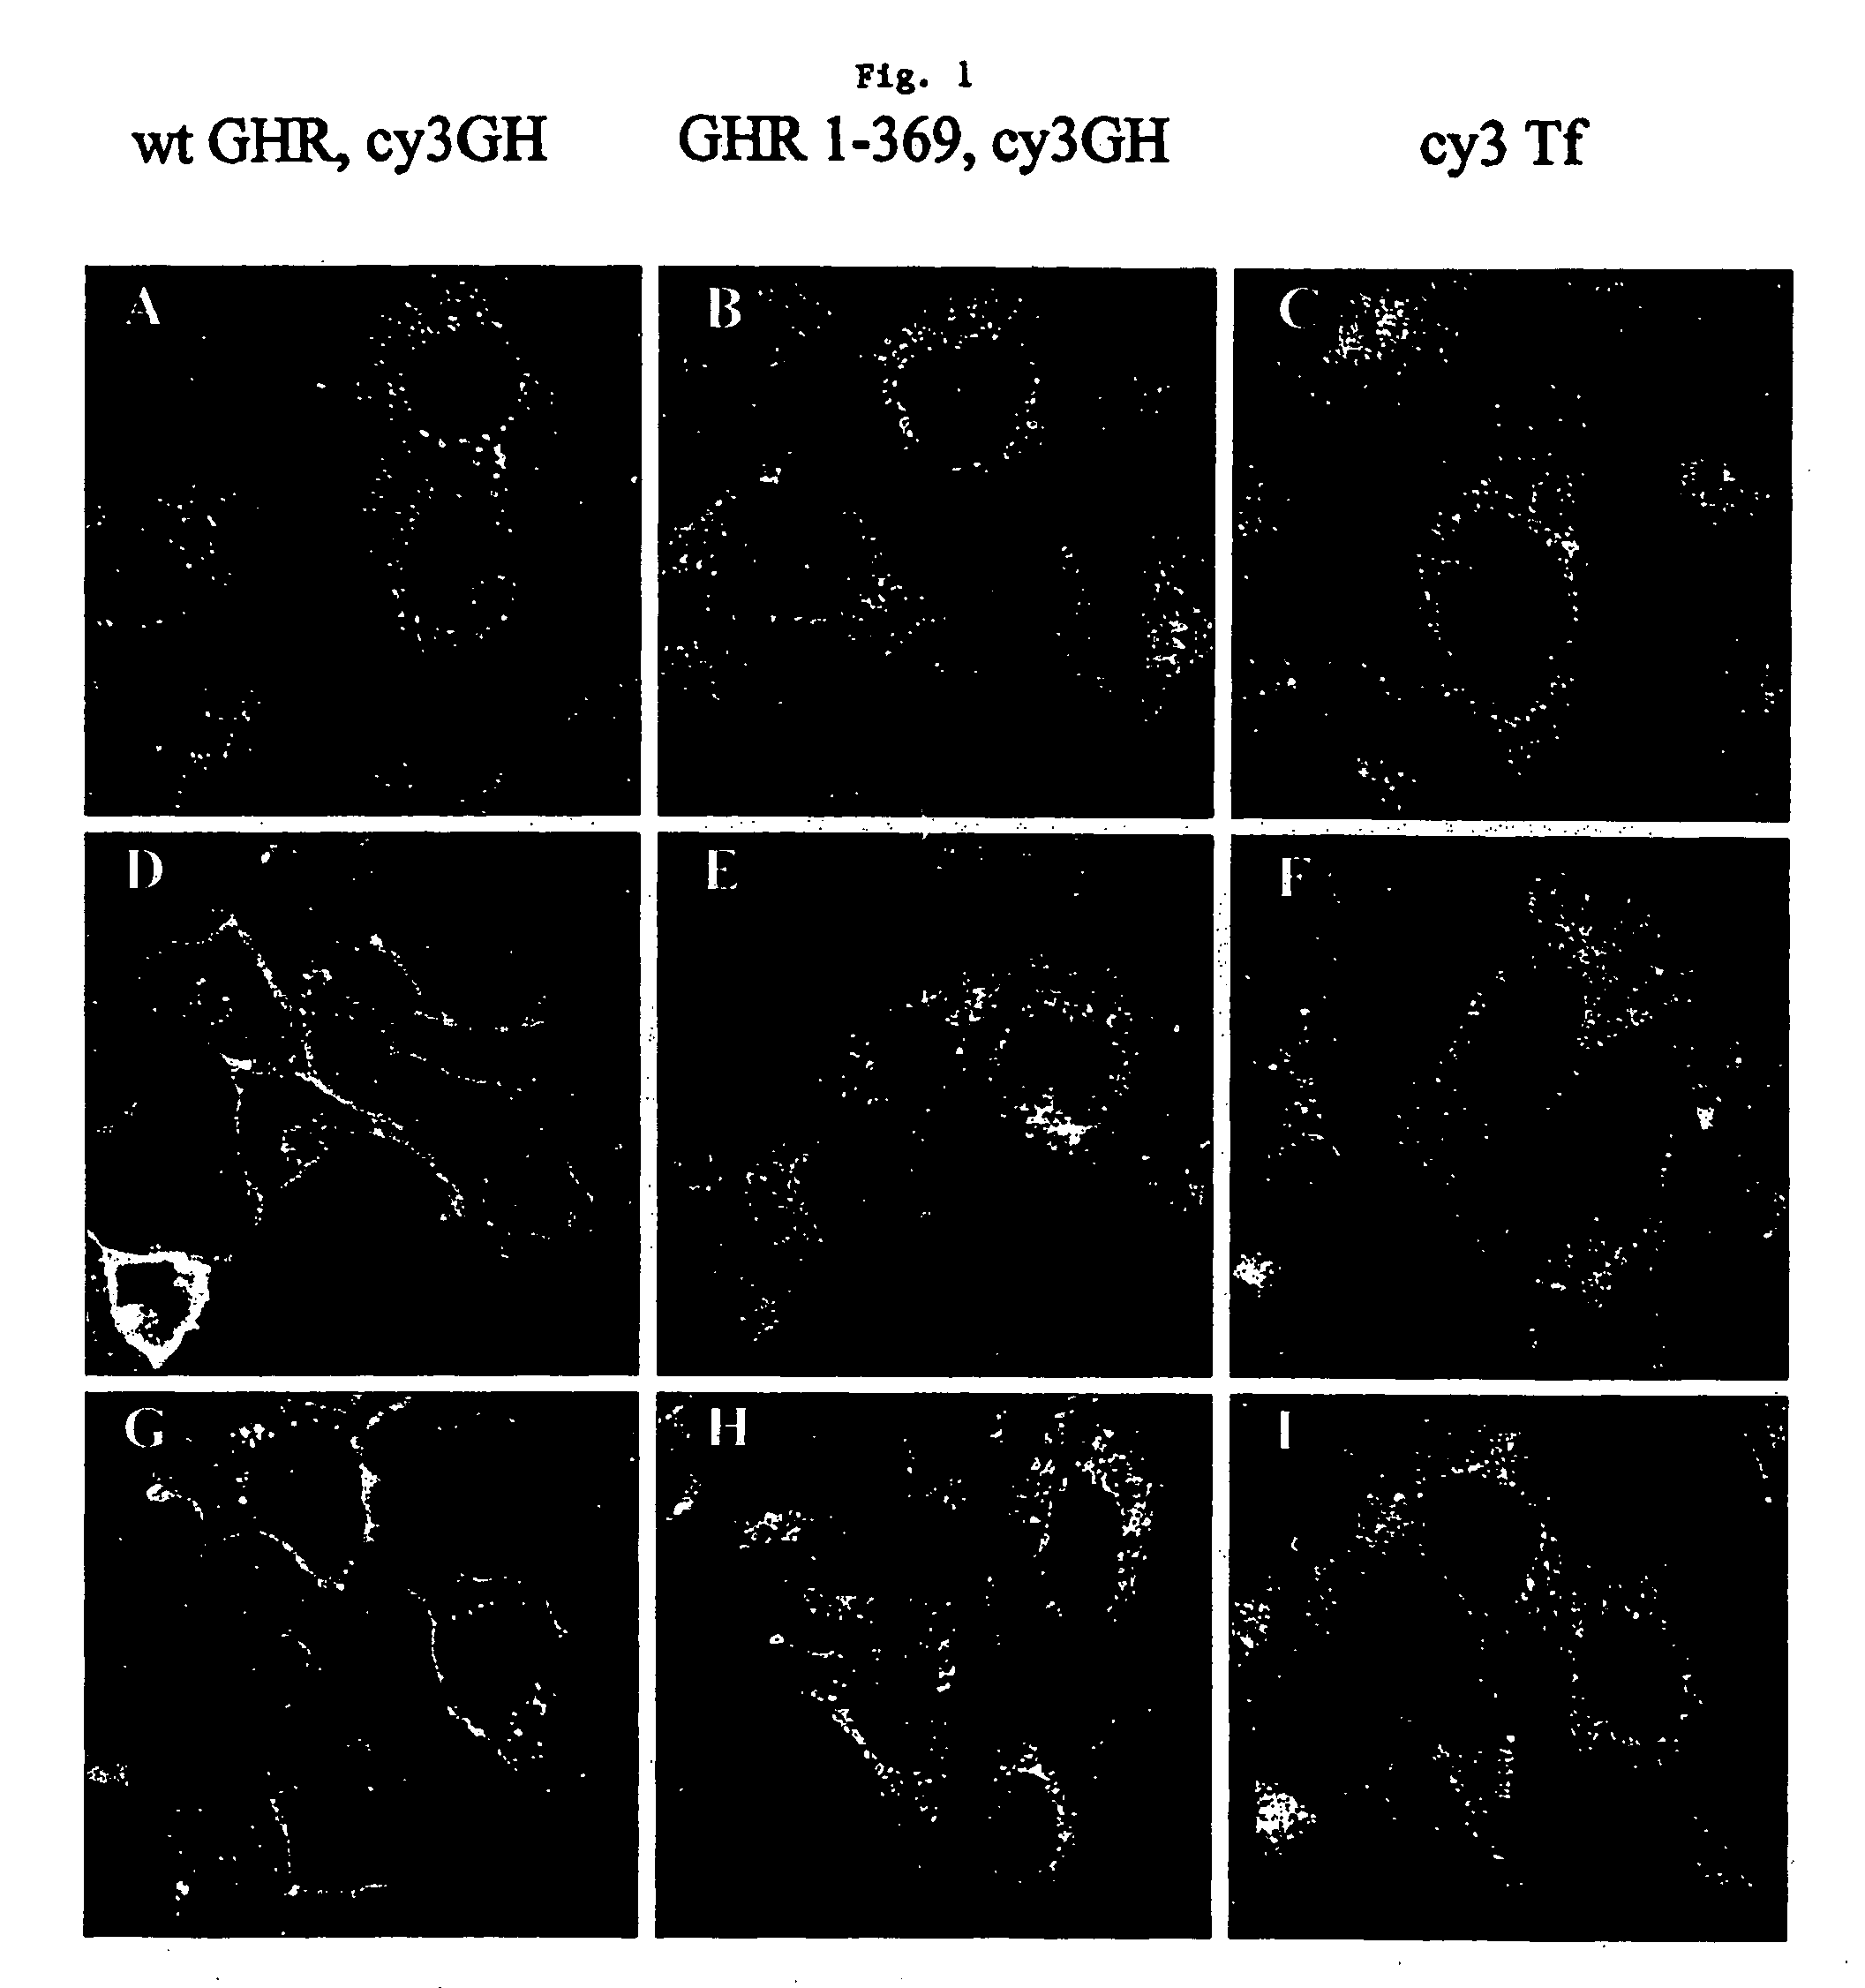 Controlling availability or activity of proteins by use of protease inhibitors or receptor fragments